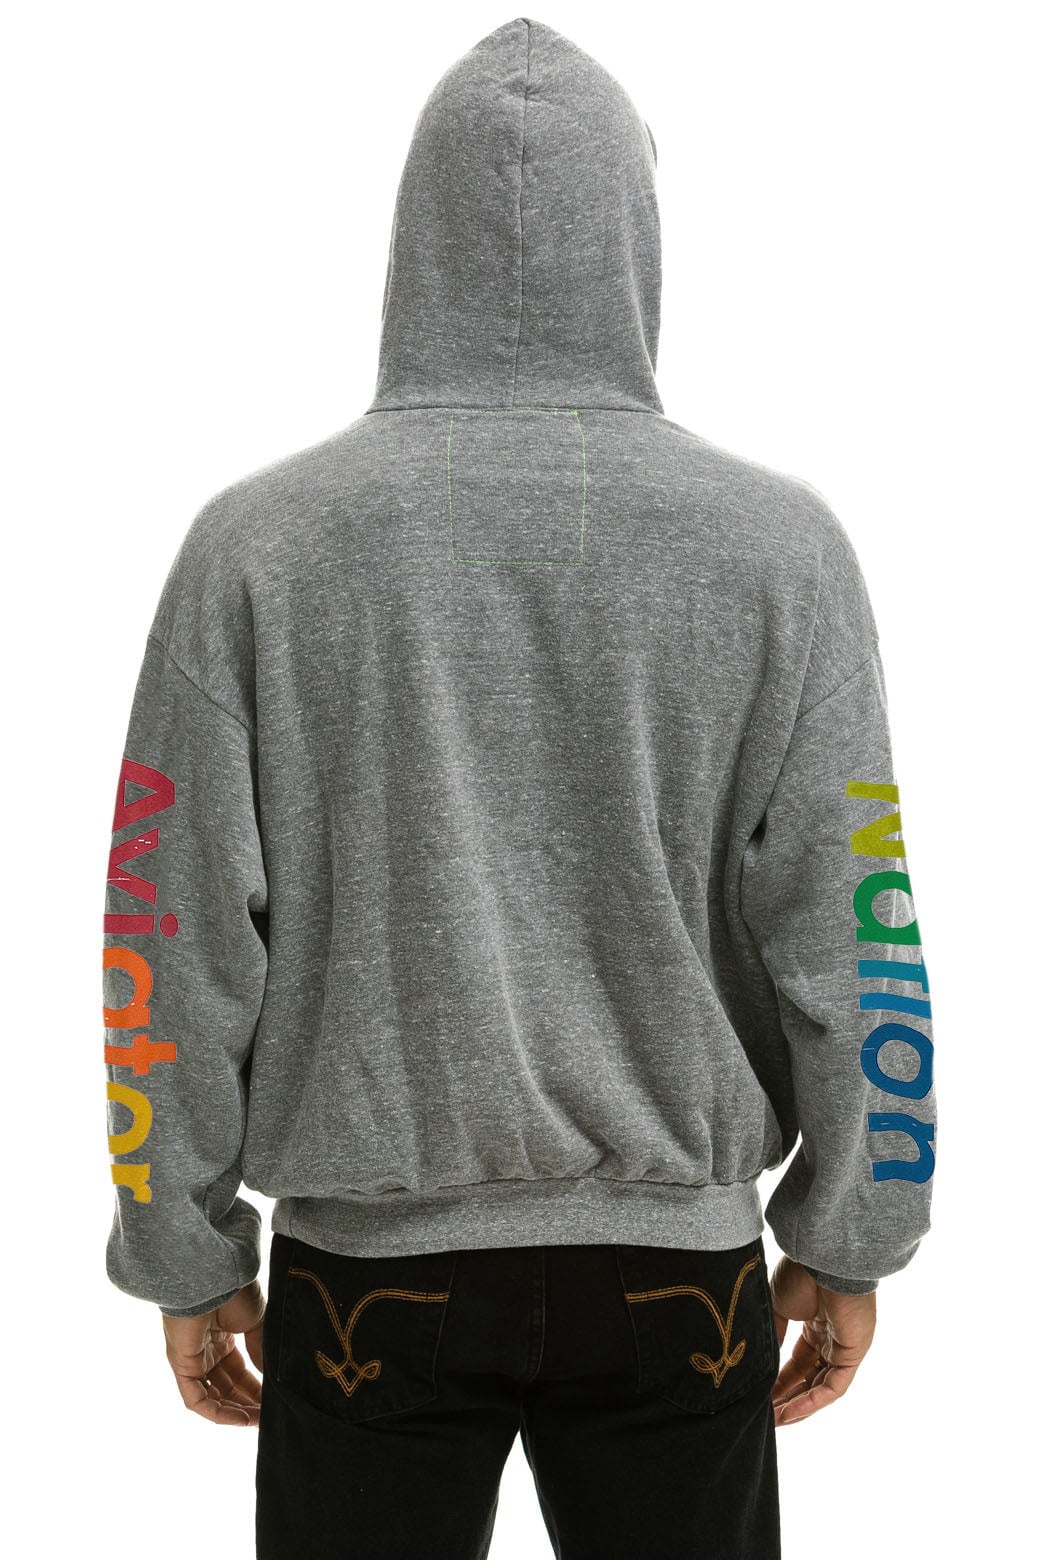 AVIATOR NATION ASPEN RELAXED PULLOVER HOODIE - HEATHER GREY Hoodie Aviator Nation 